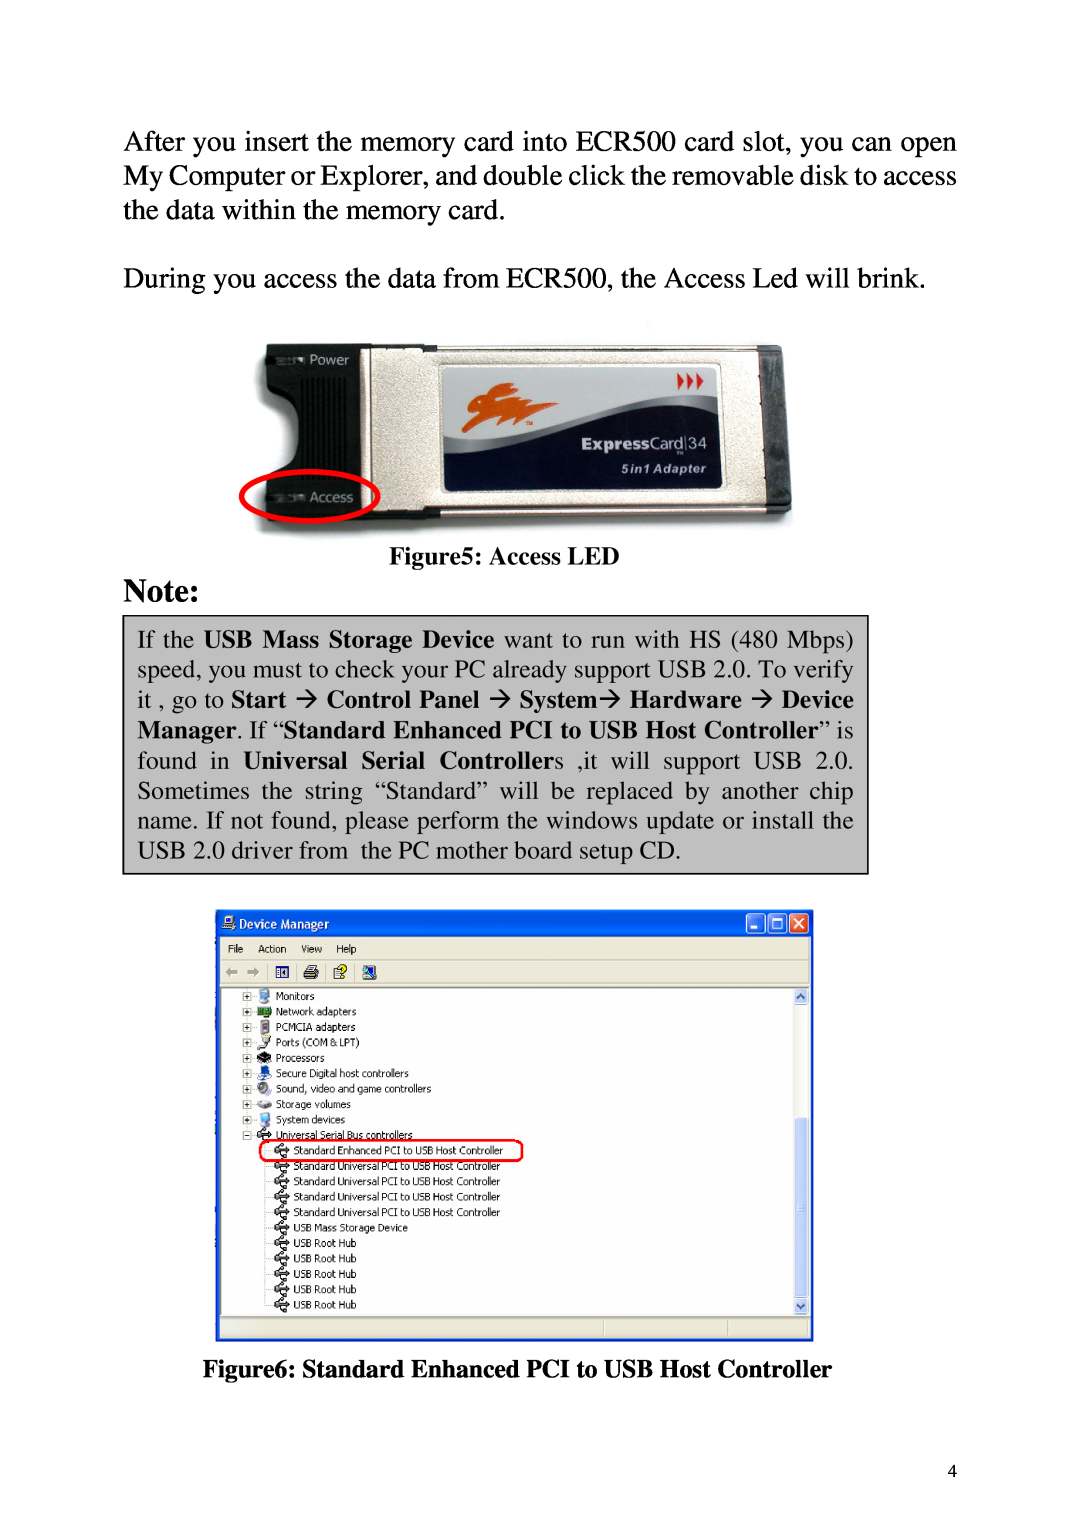 Abocom user manual During you access the data from ECR500, the Access Led will brink, Access LED 